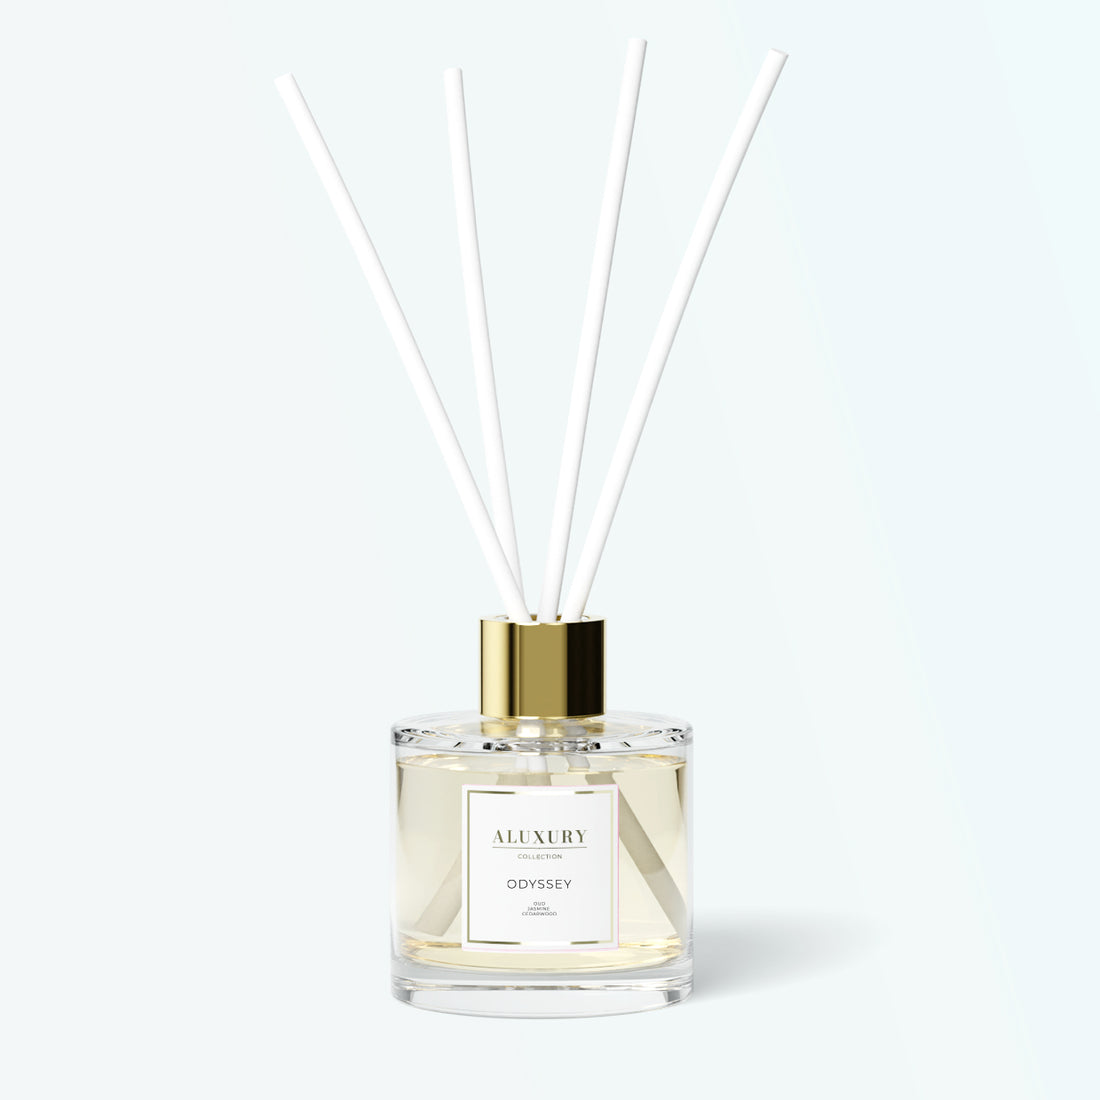 Odyssey glass luxury reed diffuser with white reeds by Aluxury